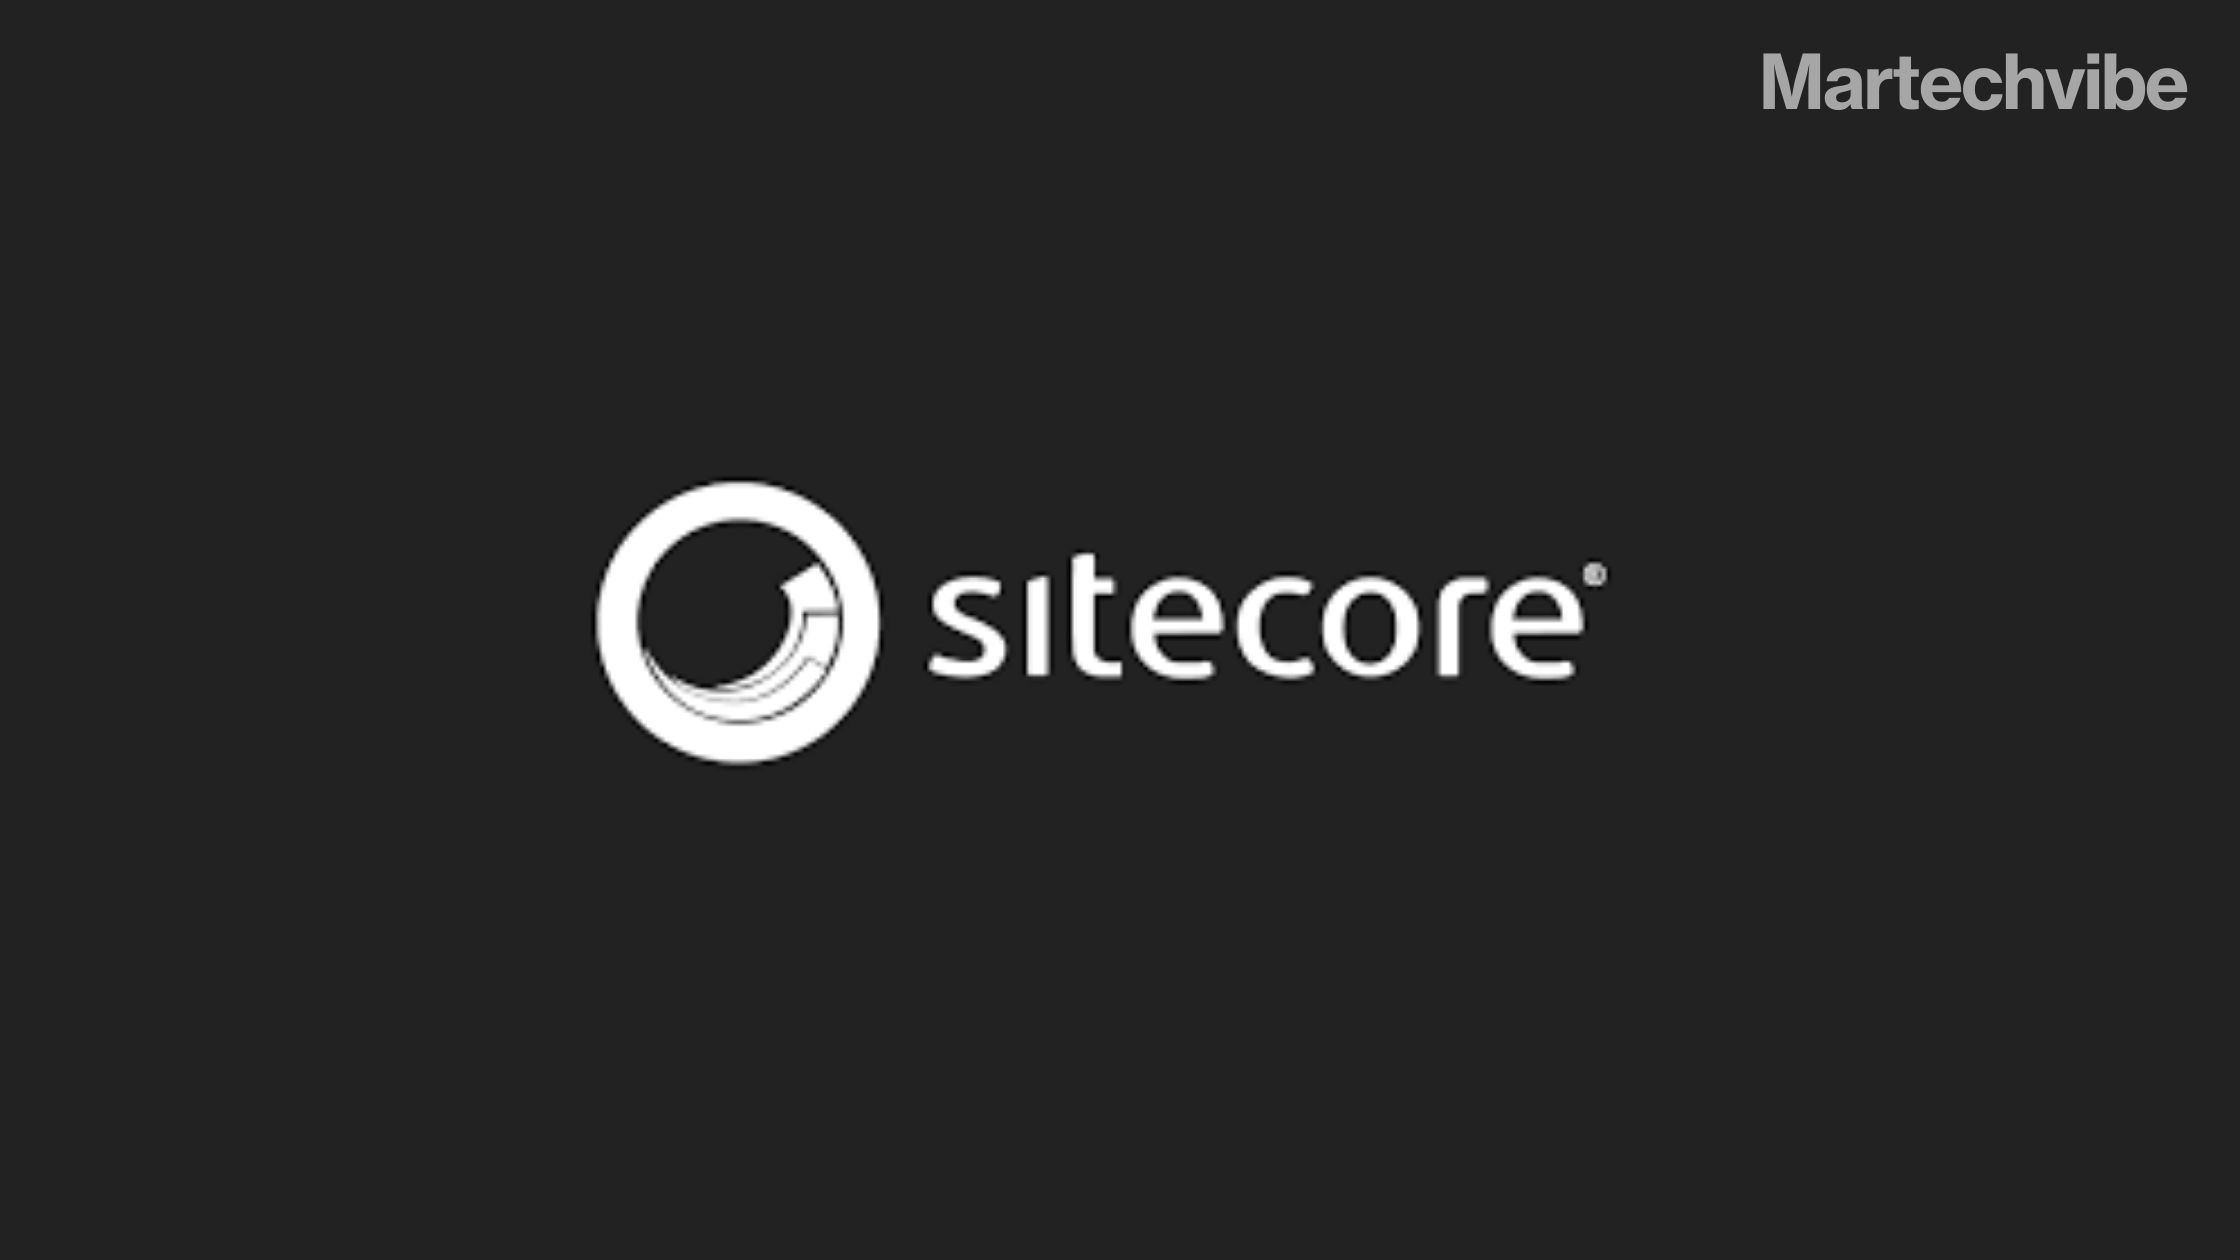 Sitecore Embarks on $1.2B Investment Plan to Accelerate Growth